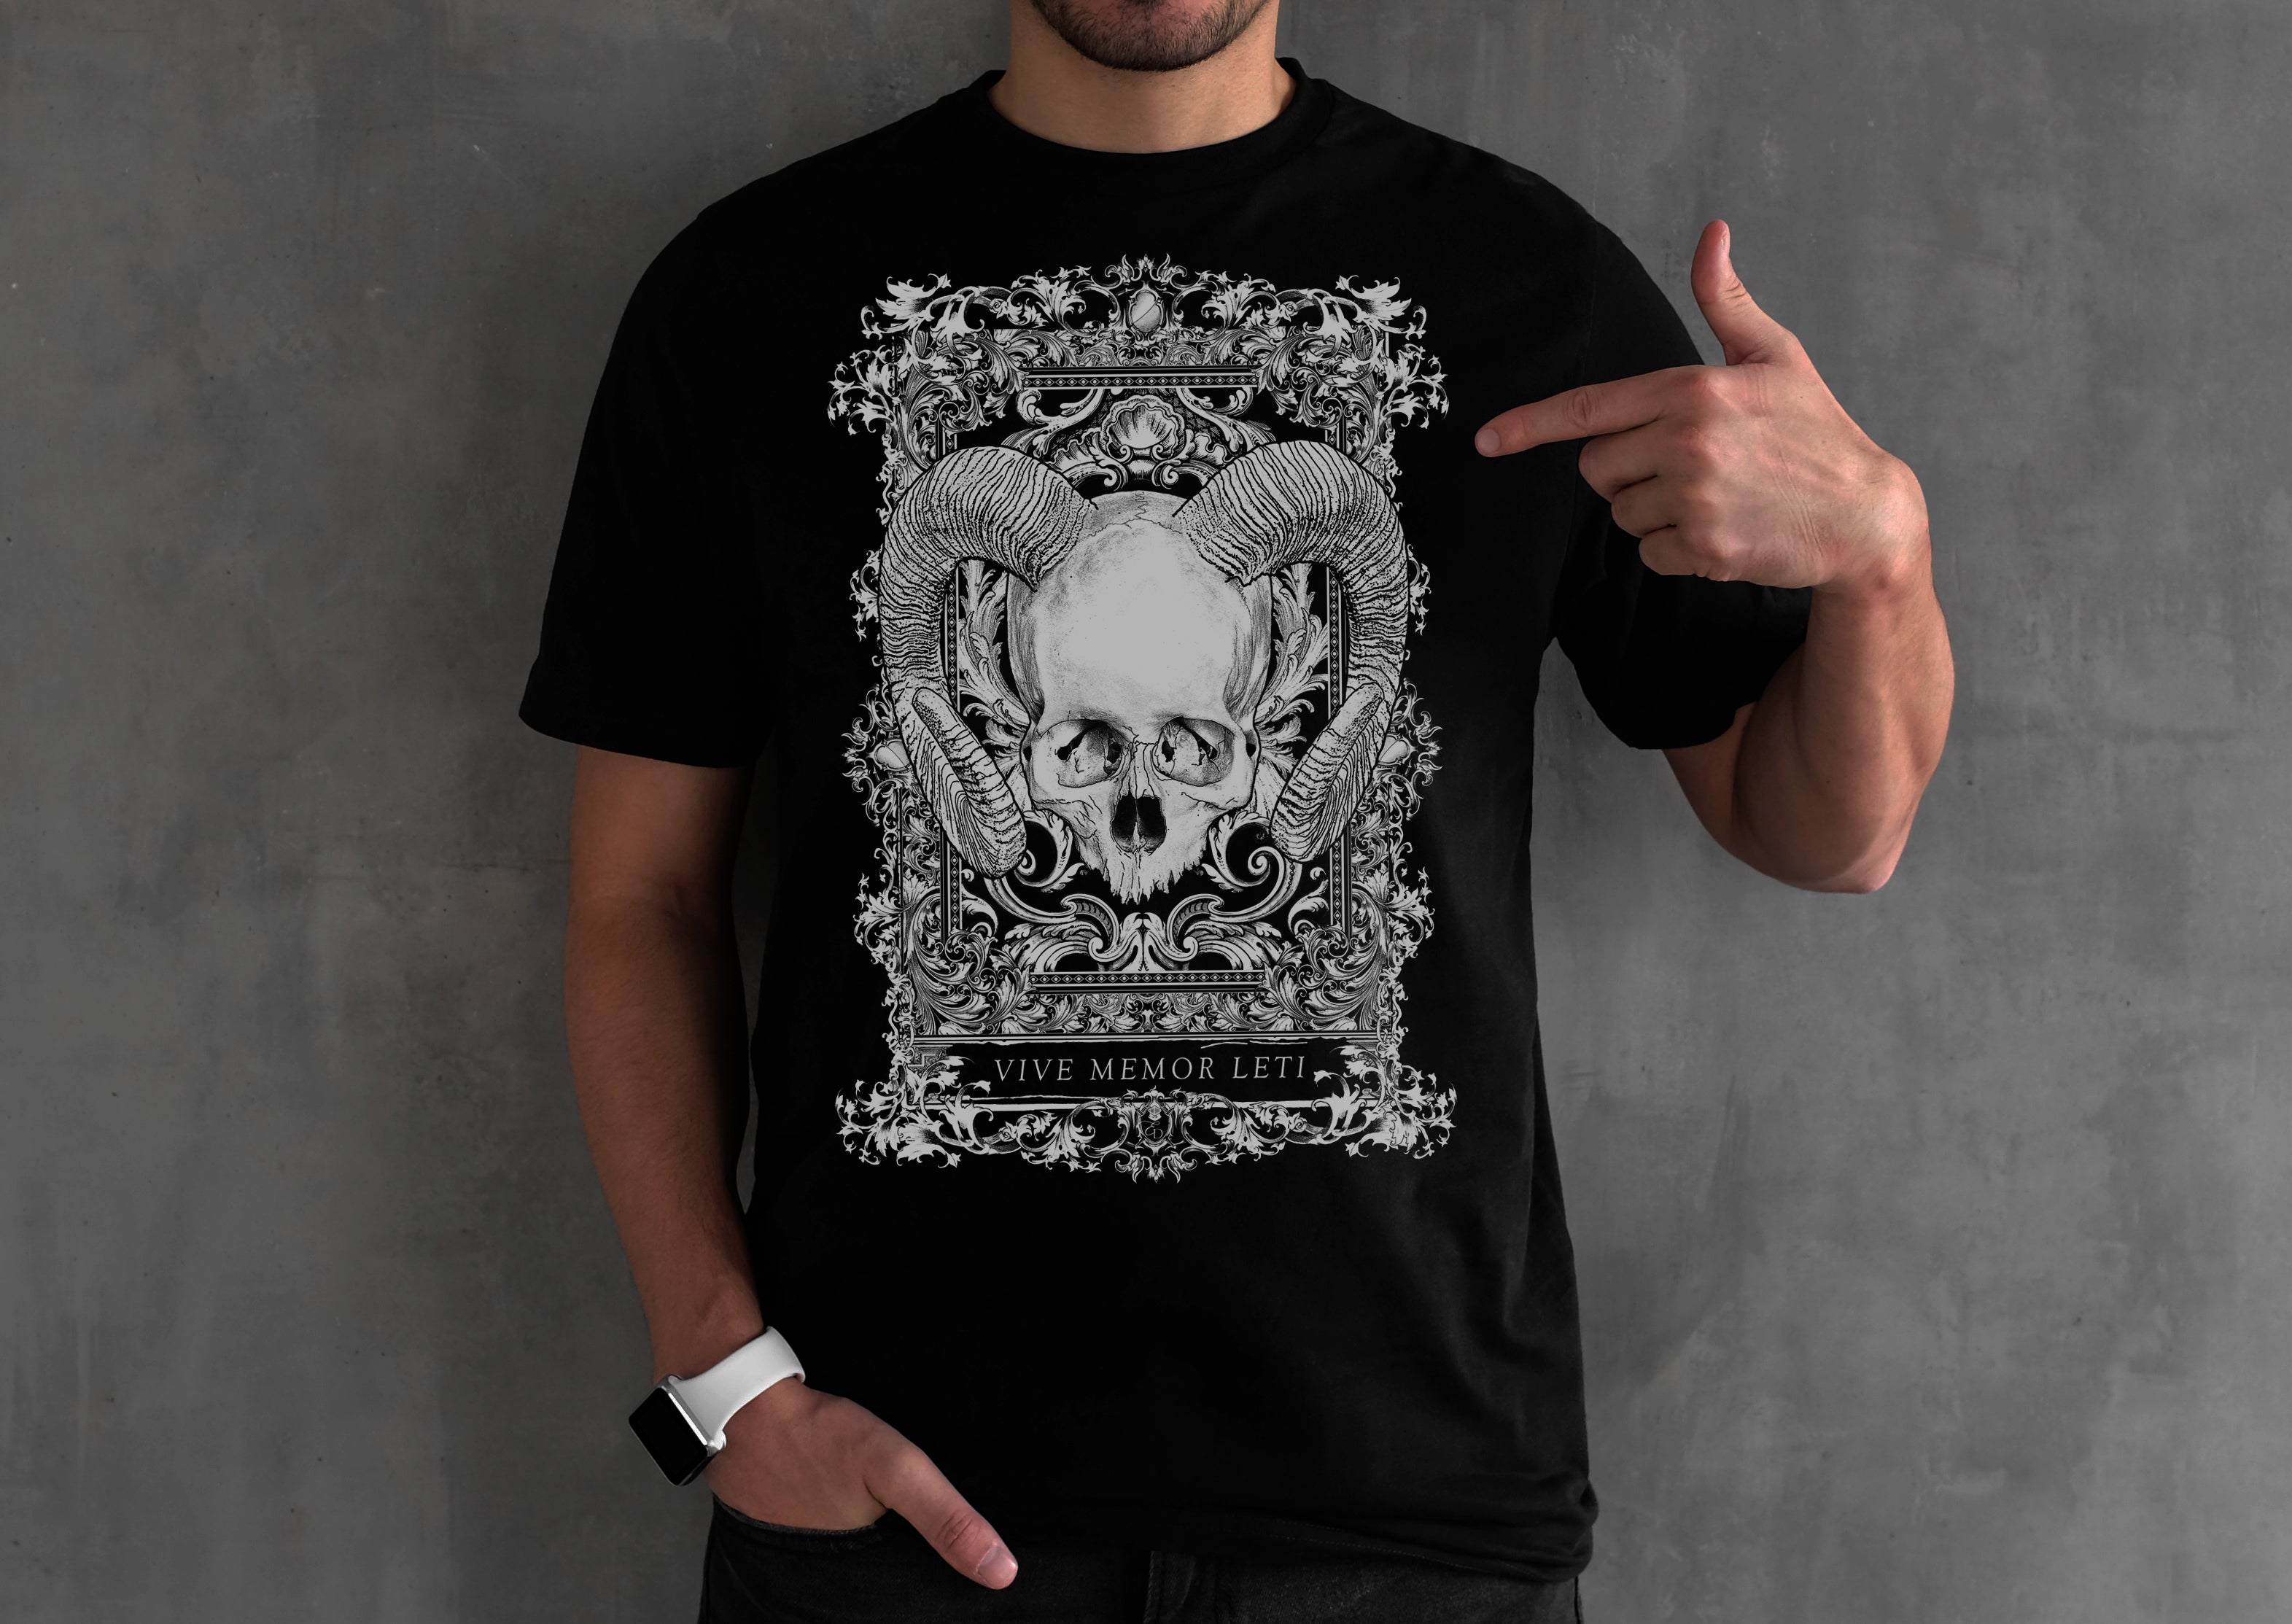 Dark Macabre Graphic Art T Shirt, Goth Clothing "The Damned"